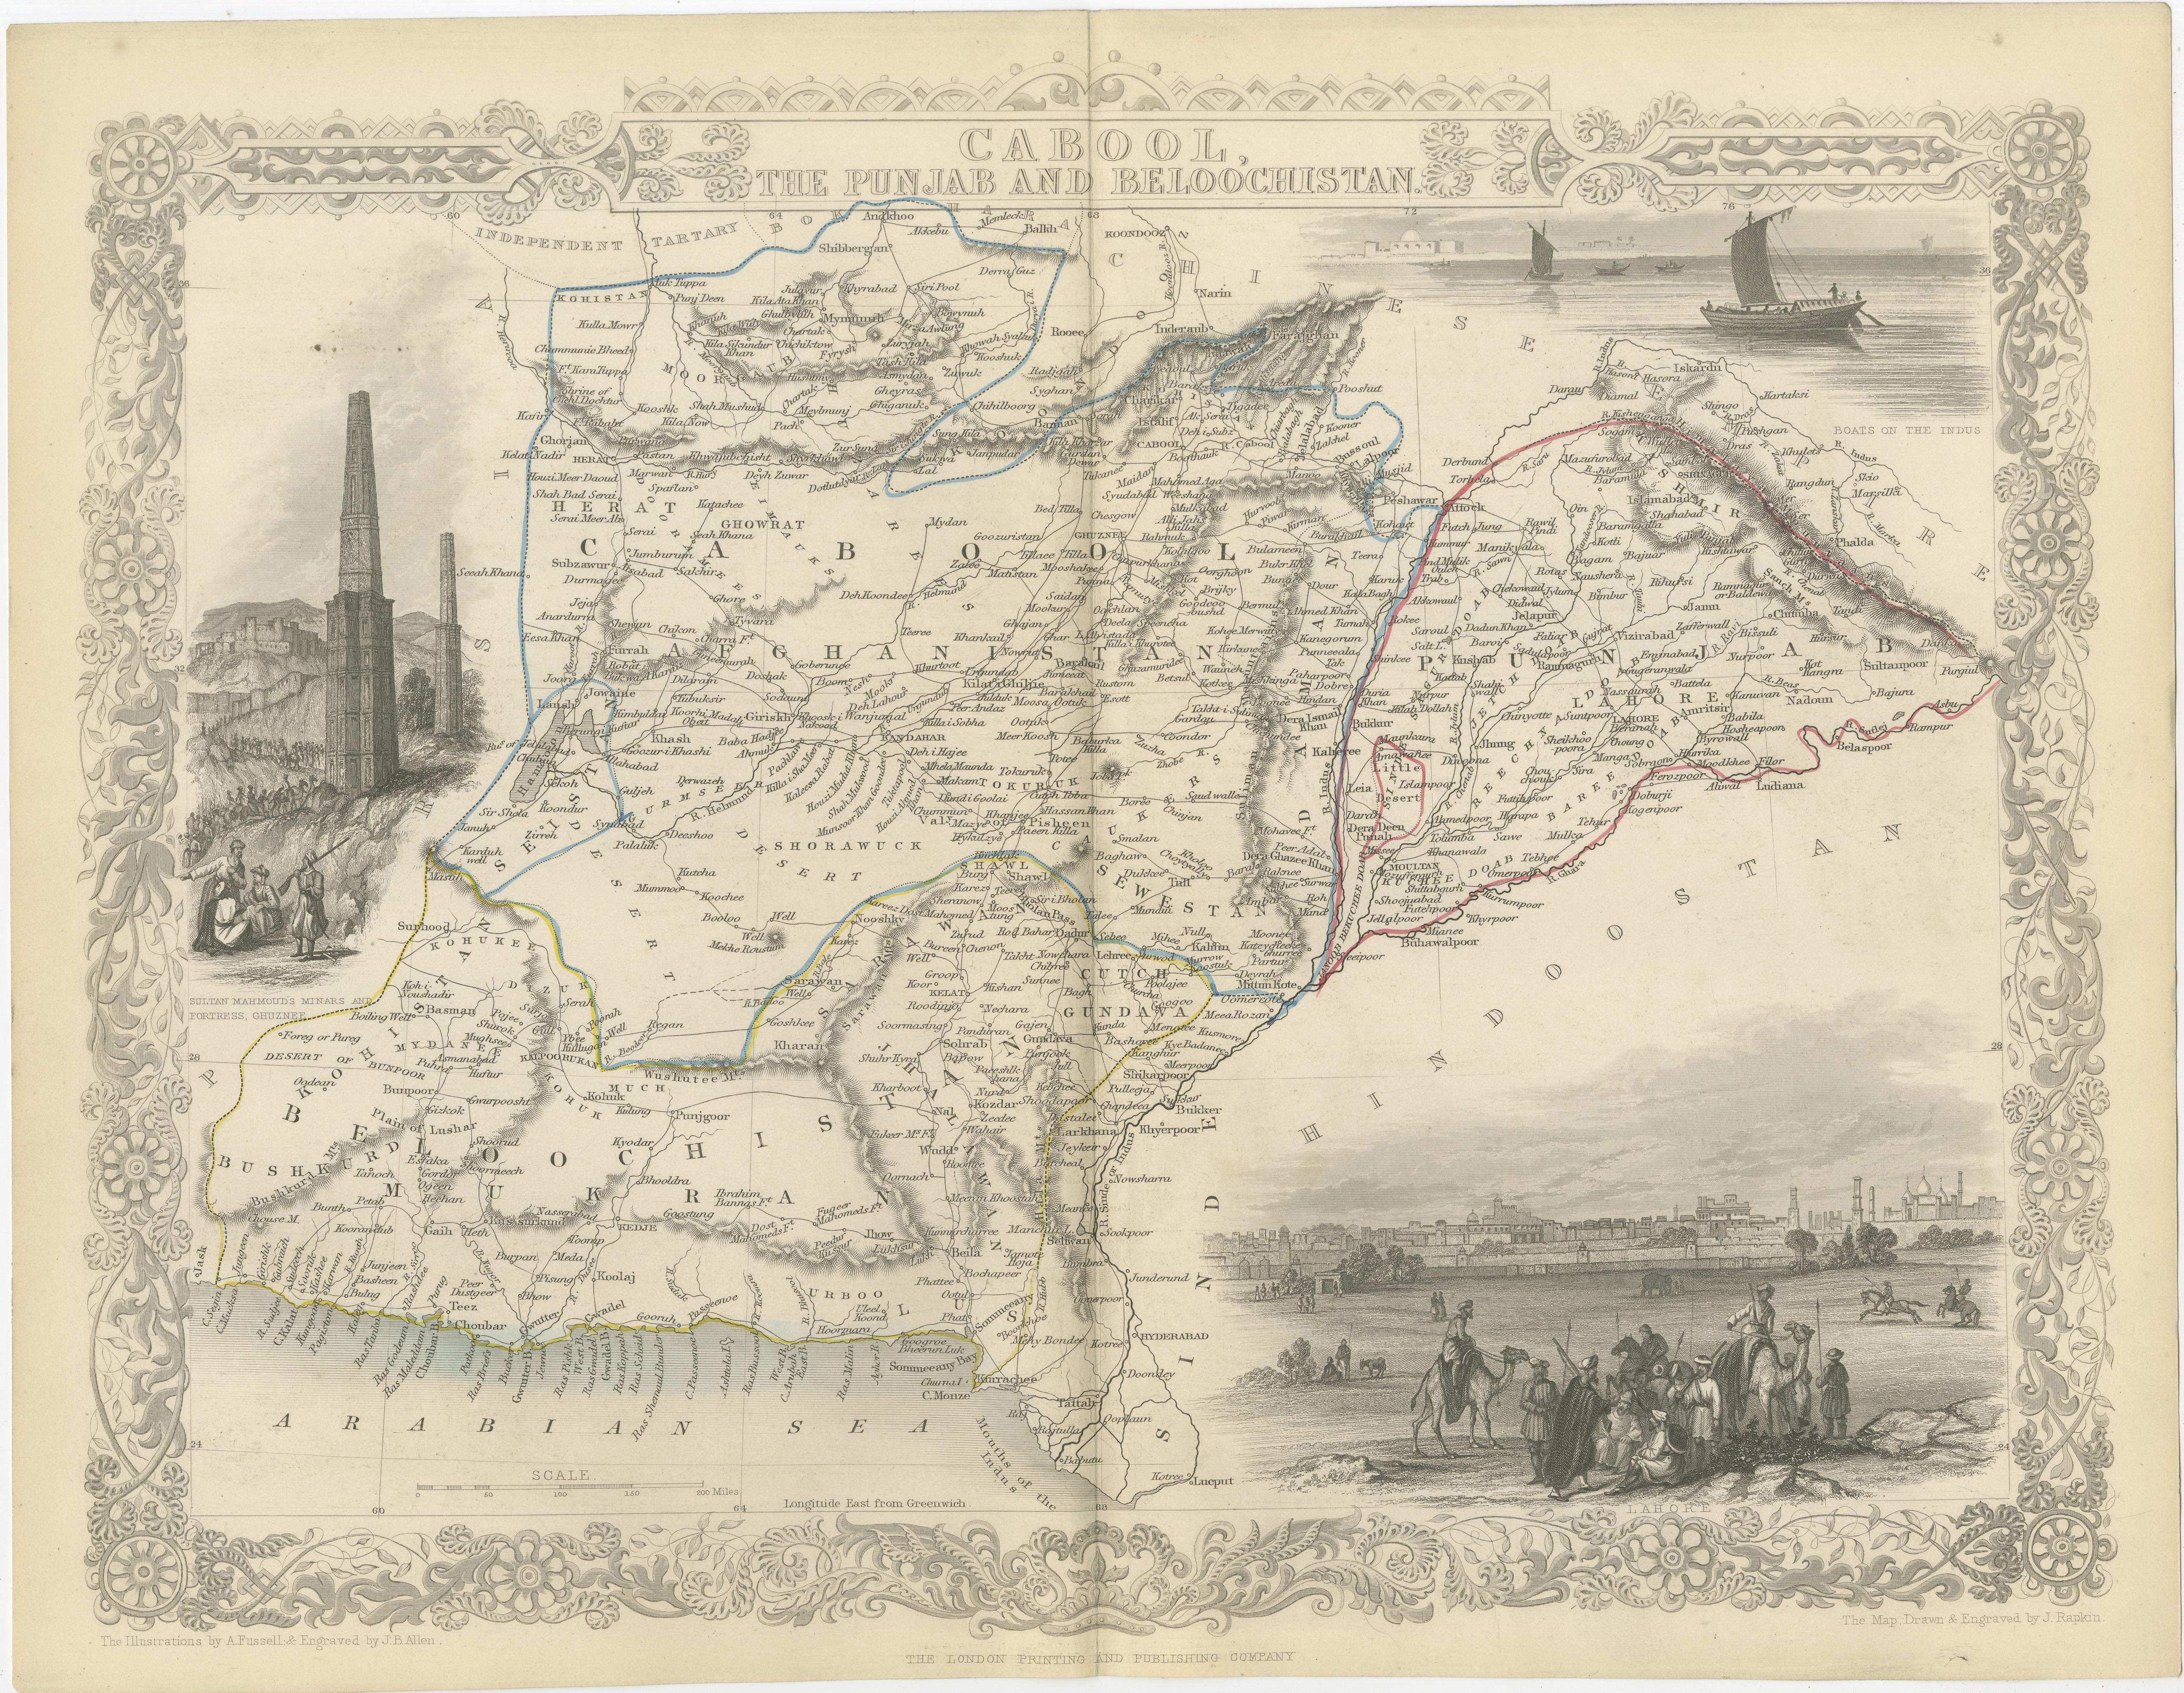 Paper An Illustrated Map of Kabul, Punjab, and Baluchistan by Tallis, 1851